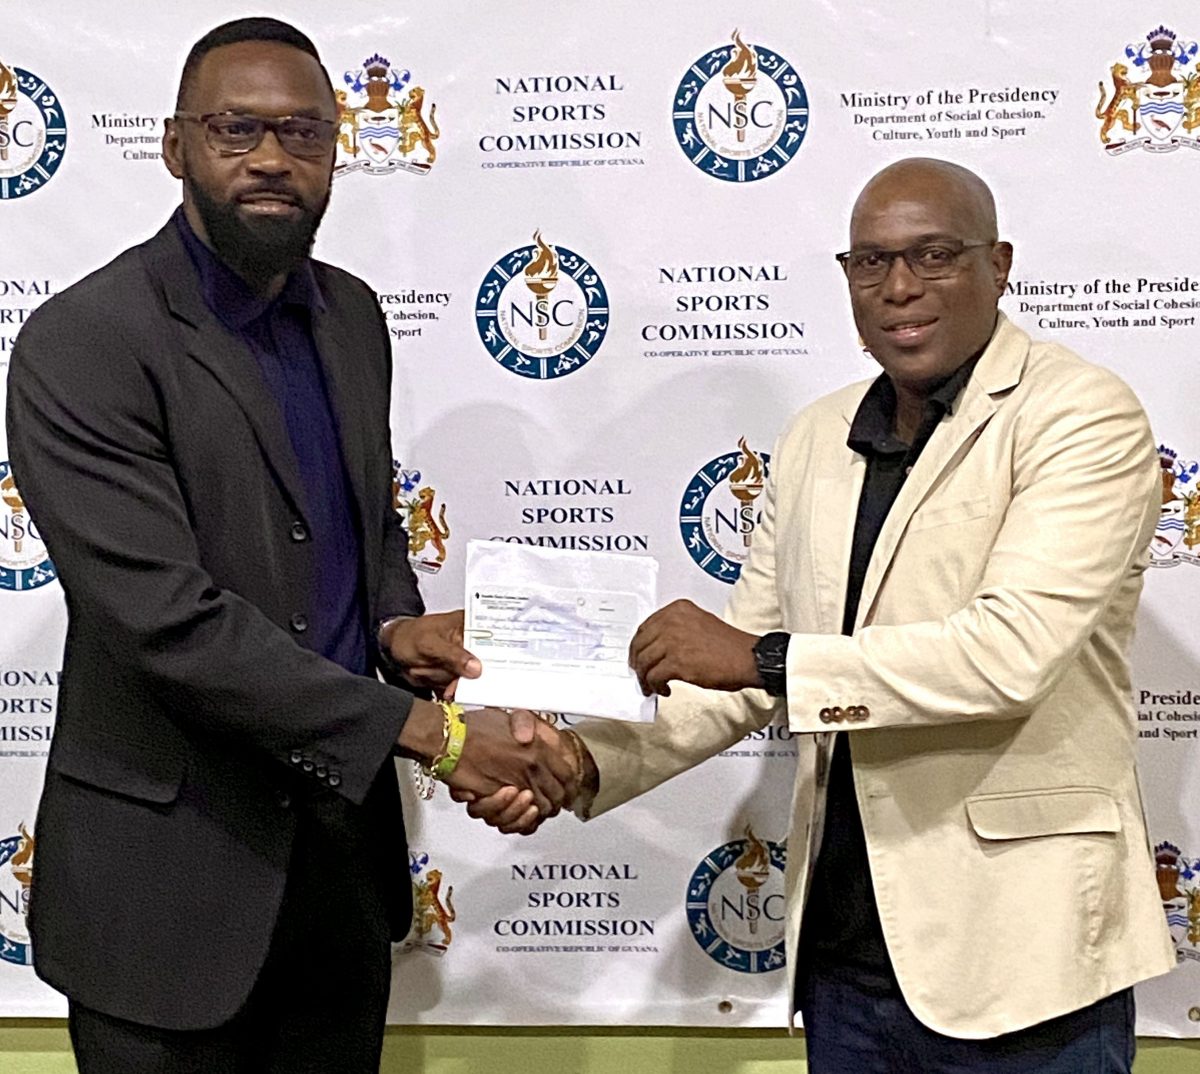 Director of Sport Christopher Jones presented a cheque worth $2.5 million to President of the Guyana Boxing Association Steve Ninvalle yesterday at the head office of the NSC on Homestretch Avenue. The funds will be used to offset the cost of the airfare for boxers and officials traveling to the Olympic Qualifiers in Argentina from March 26 to April 3.
